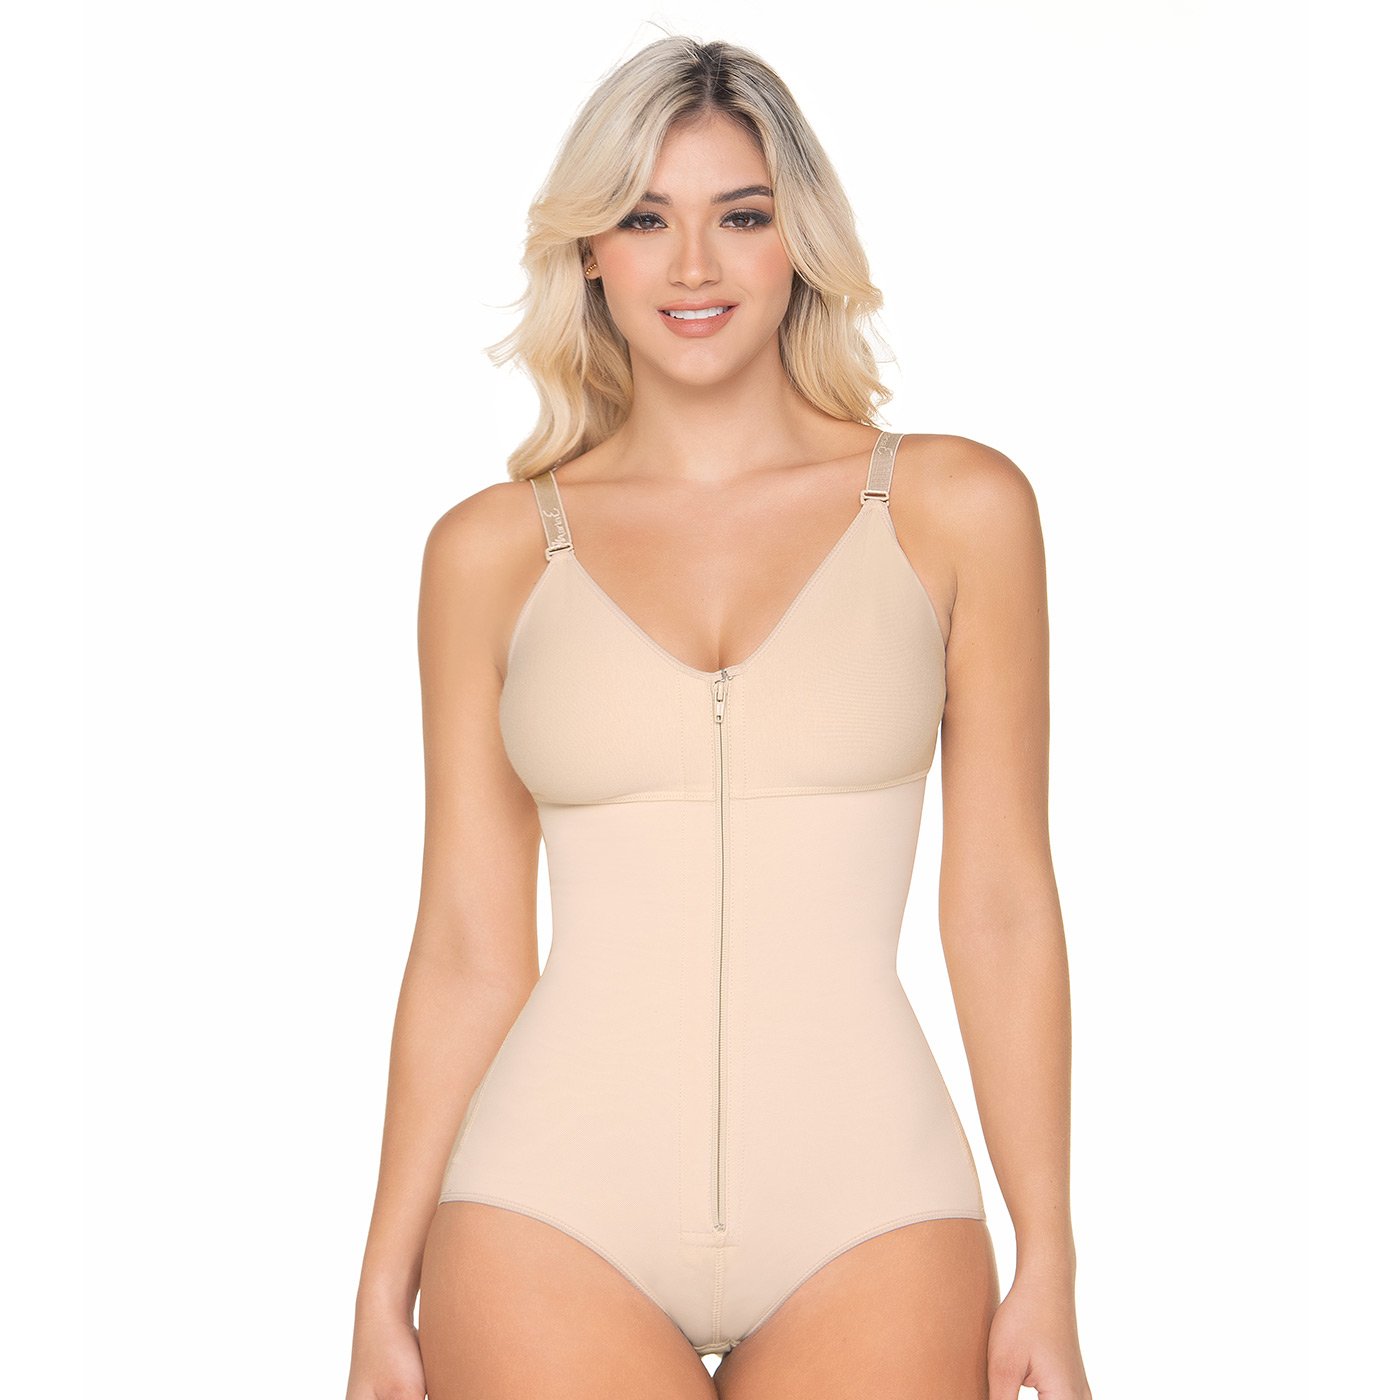 MARIAE Full Body Shaper Tummy Control Shapewear Girdles for Women | Fajas  Colombianas Post Surgery : : Clothing, Shoes & Accessories